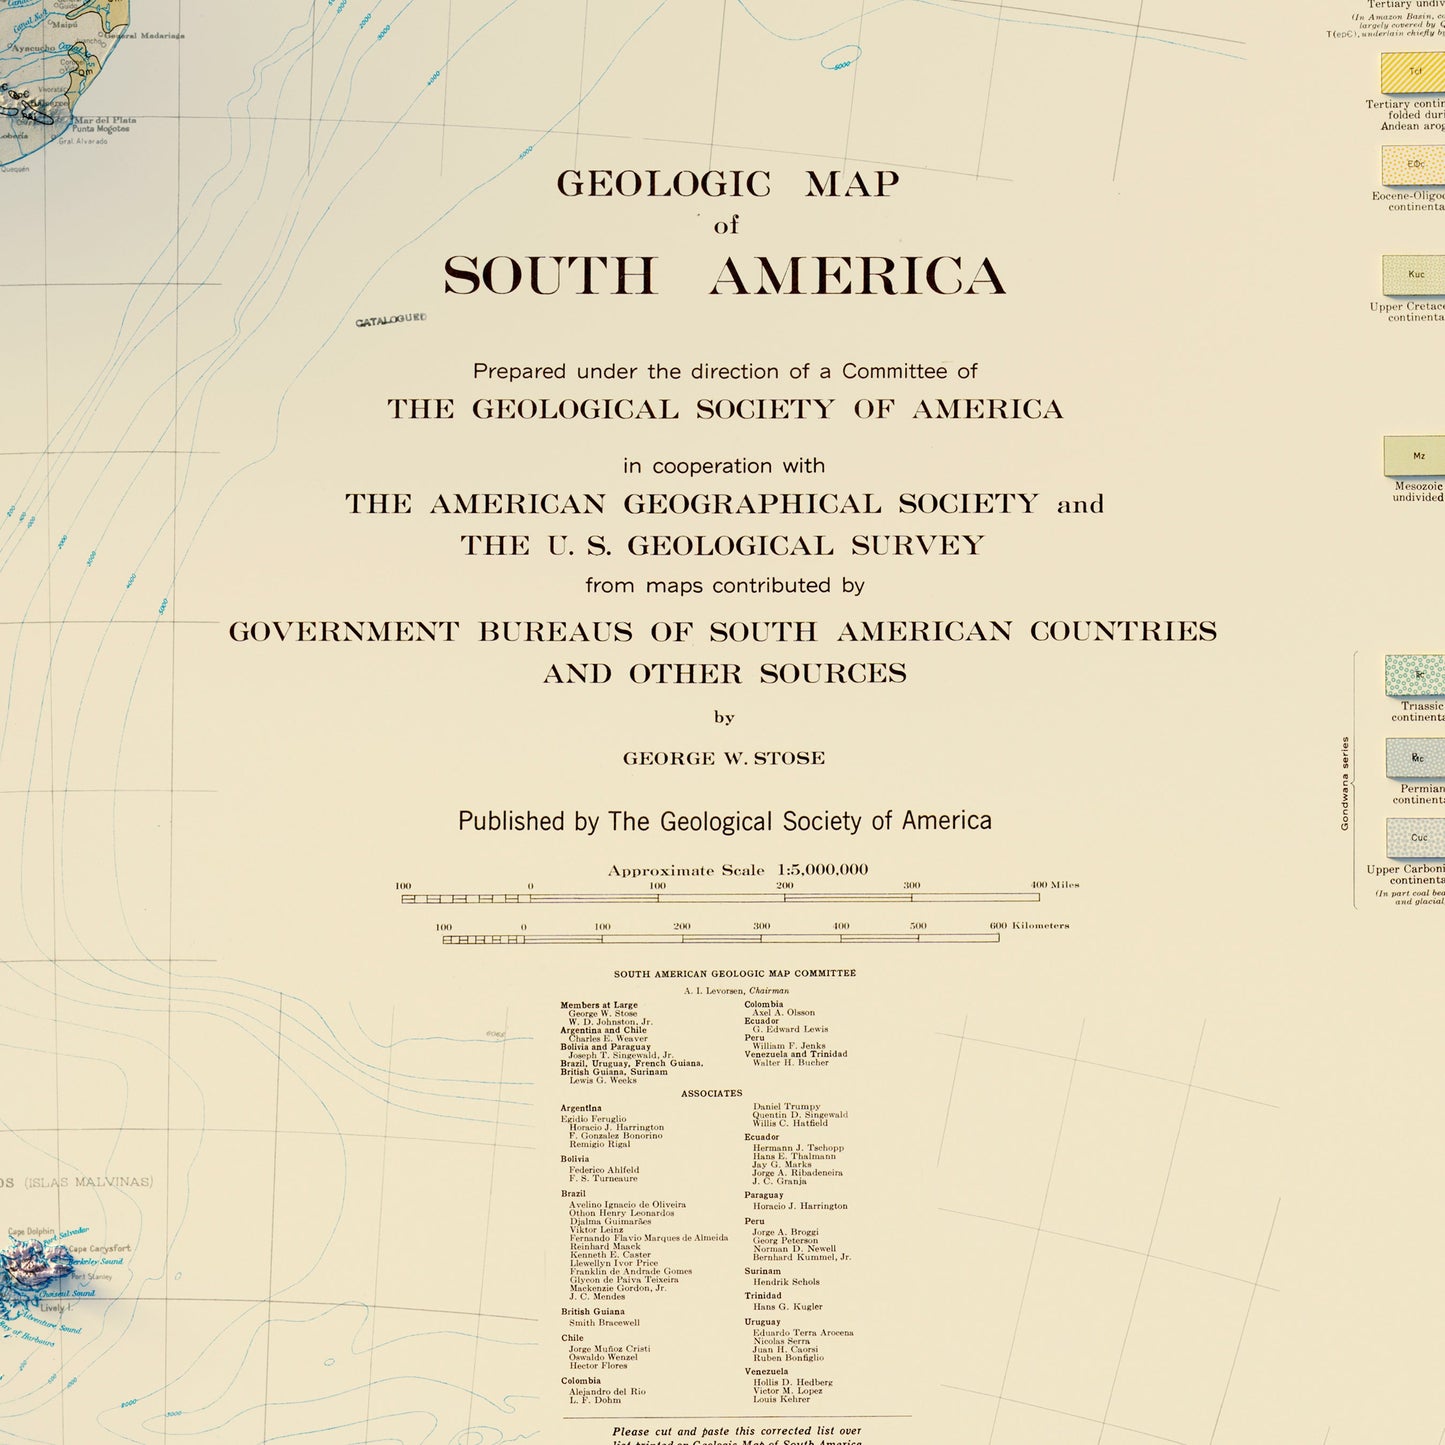 South America 1950 Shaded Relief Map